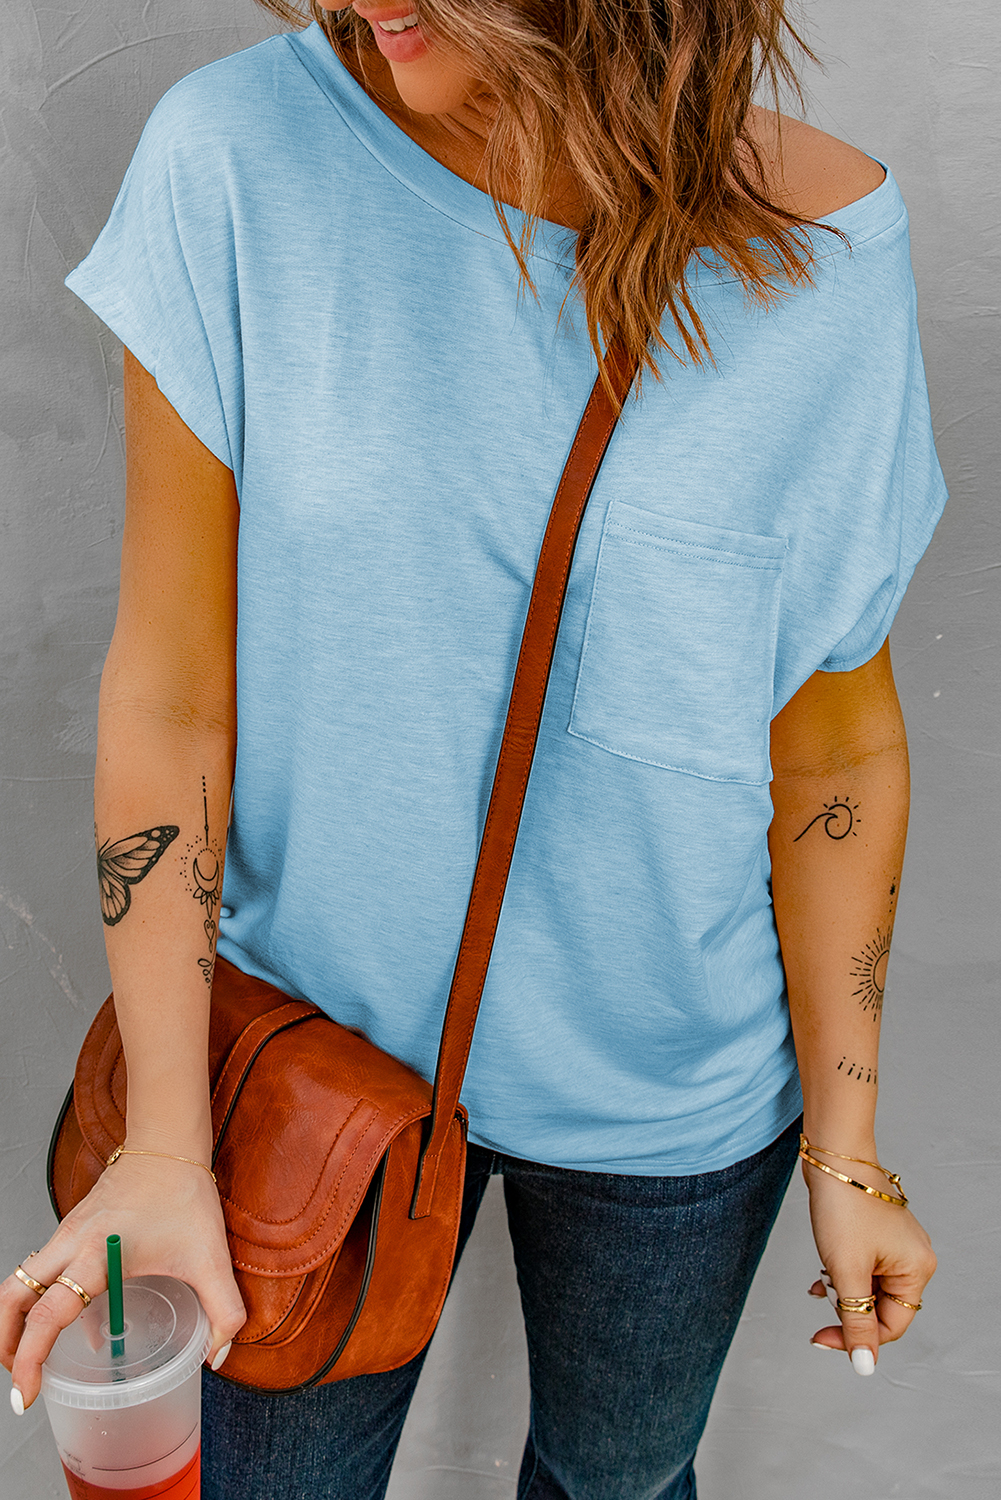 Shewin Wholesale Women CLOTHING Light Blue Solid Color Short Sleeve Basic T Shirt with Patch Pocket